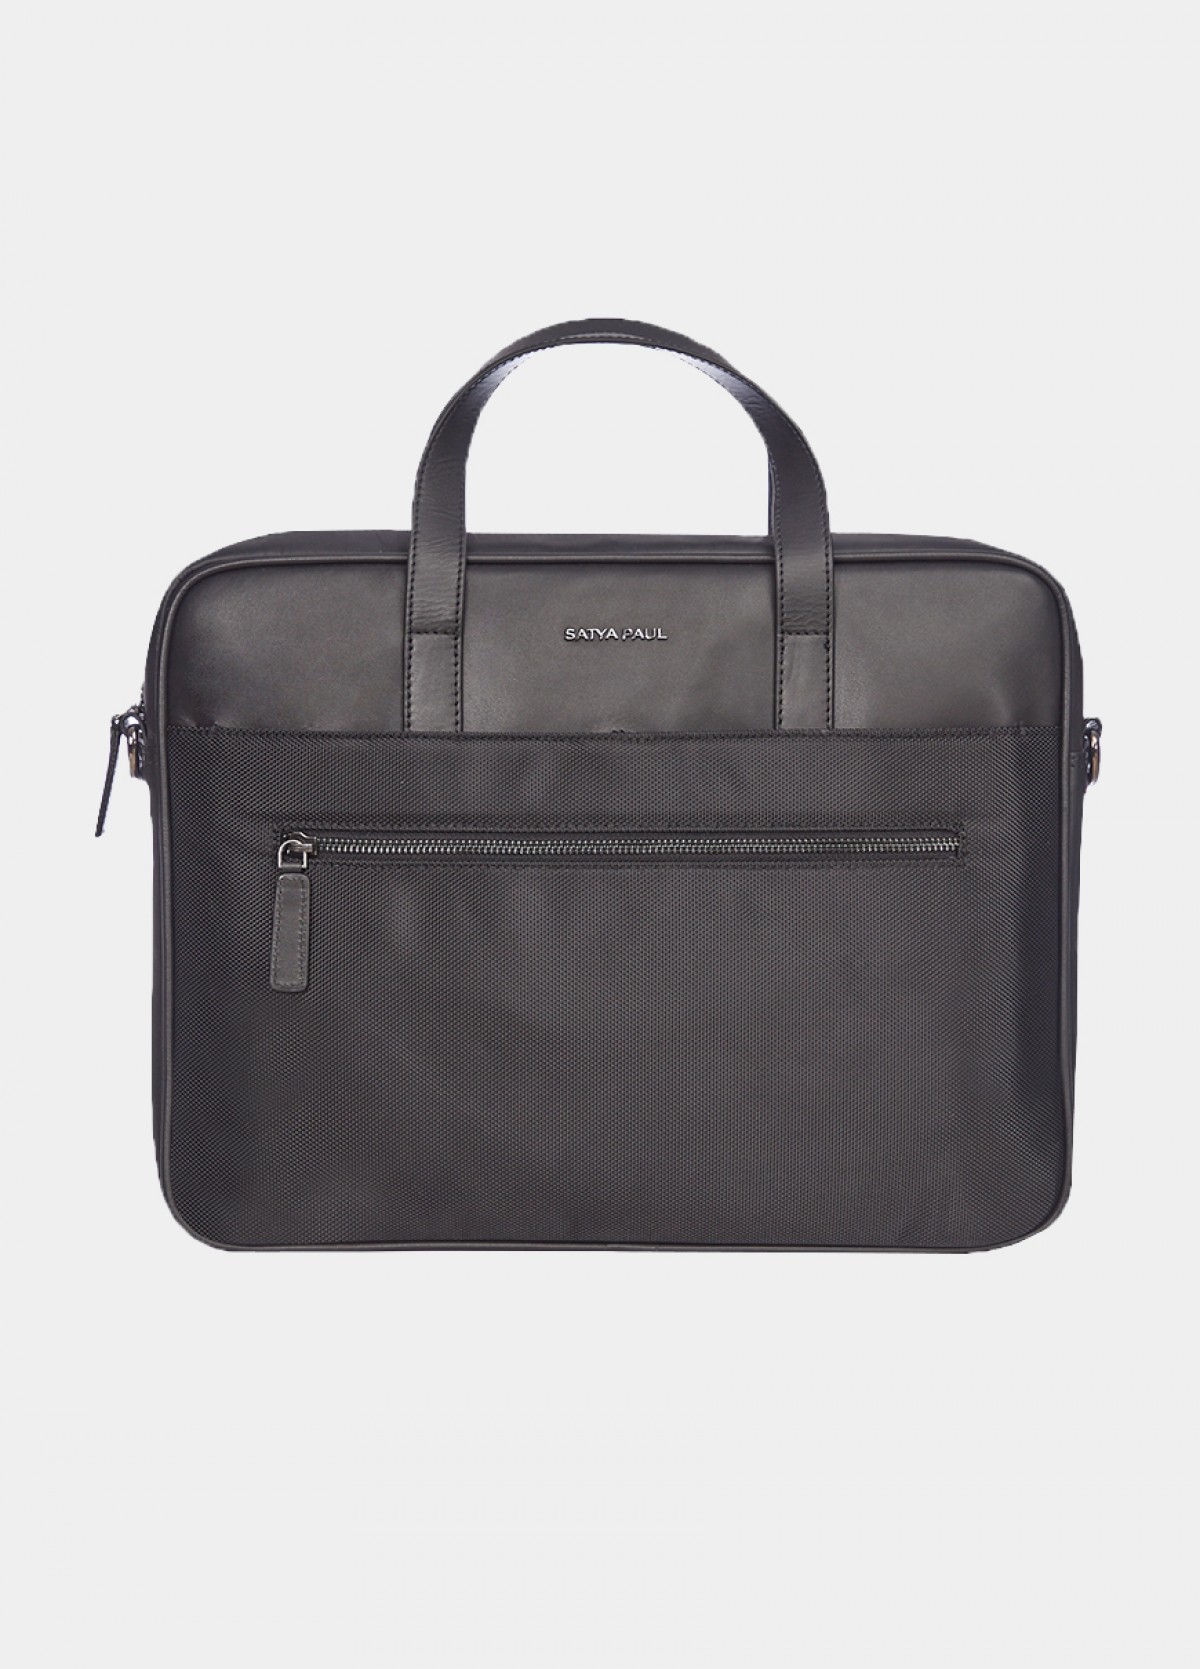 The Leather Laptop Bag